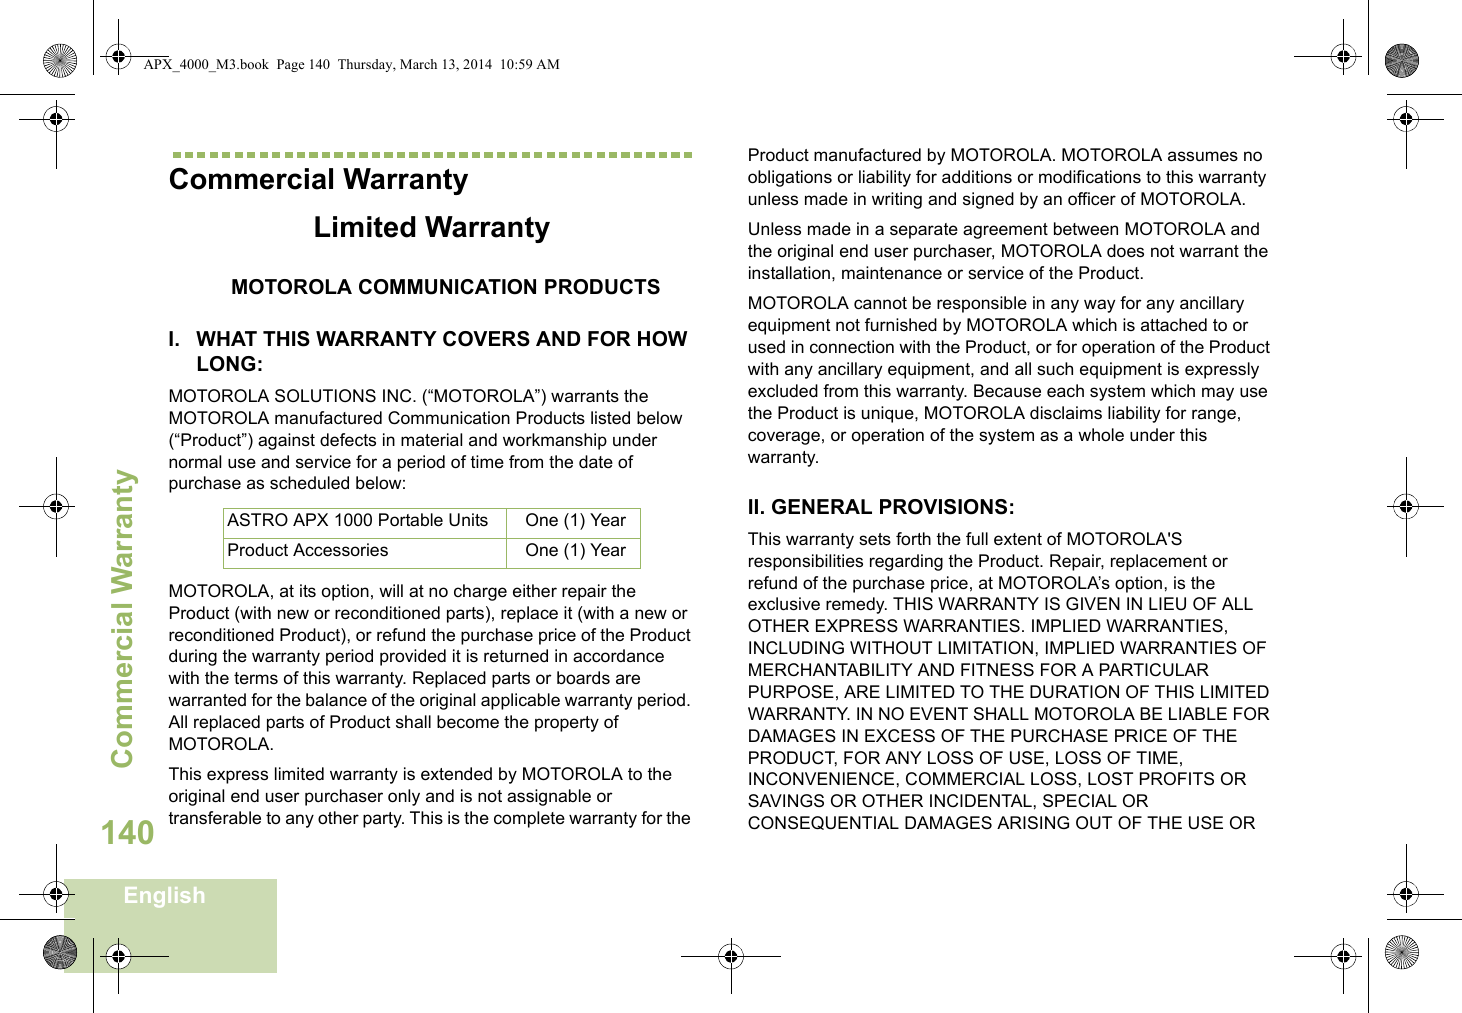 Commercial WarrantyEnglish140Commercial WarrantyLimited WarrantyMOTOROLA COMMUNICATION PRODUCTSI. WHAT THIS WARRANTY COVERS AND FOR HOW LONG:MOTOROLA SOLUTIONS INC. (“MOTOROLA”) warrants the MOTOROLA manufactured Communication Products listed below (“Product”) against defects in material and workmanship under normal use and service for a period of time from the date of purchase as scheduled below:MOTOROLA, at its option, will at no charge either repair the Product (with new or reconditioned parts), replace it (with a new or reconditioned Product), or refund the purchase price of the Product during the warranty period provided it is returned in accordance with the terms of this warranty. Replaced parts or boards are warranted for the balance of the original applicable warranty period. All replaced parts of Product shall become the property of MOTOROLA.This express limited warranty is extended by MOTOROLA to the original end user purchaser only and is not assignable or transferable to any other party. This is the complete warranty for the Product manufactured by MOTOROLA. MOTOROLA assumes no obligations or liability for additions or modifications to this warranty unless made in writing and signed by an officer of MOTOROLA. Unless made in a separate agreement between MOTOROLA and the original end user purchaser, MOTOROLA does not warrant the installation, maintenance or service of the Product.MOTOROLA cannot be responsible in any way for any ancillary equipment not furnished by MOTOROLA which is attached to or used in connection with the Product, or for operation of the Product with any ancillary equipment, and all such equipment is expressly excluded from this warranty. Because each system which may use the Product is unique, MOTOROLA disclaims liability for range, coverage, or operation of the system as a whole under this warranty.II. GENERAL PROVISIONS:This warranty sets forth the full extent of MOTOROLA&apos;S responsibilities regarding the Product. Repair, replacement or refund of the purchase price, at MOTOROLA’s option, is the exclusive remedy. THIS WARRANTY IS GIVEN IN LIEU OF ALL OTHER EXPRESS WARRANTIES. IMPLIED WARRANTIES, INCLUDING WITHOUT LIMITATION, IMPLIED WARRANTIES OF MERCHANTABILITY AND FITNESS FOR A PARTICULAR PURPOSE, ARE LIMITED TO THE DURATION OF THIS LIMITED WARRANTY. IN NO EVENT SHALL MOTOROLA BE LIABLE FOR DAMAGES IN EXCESS OF THE PURCHASE PRICE OF THE PRODUCT, FOR ANY LOSS OF USE, LOSS OF TIME, INCONVENIENCE, COMMERCIAL LOSS, LOST PROFITS OR SAVINGS OR OTHER INCIDENTAL, SPECIAL OR CONSEQUENTIAL DAMAGES ARISING OUT OF THE USE OR ASTRO APX 1000 Portable Units One (1) YearProduct Accessories One (1) YearAPX_4000_M3.book  Page 140  Thursday, March 13, 2014  10:59 AM